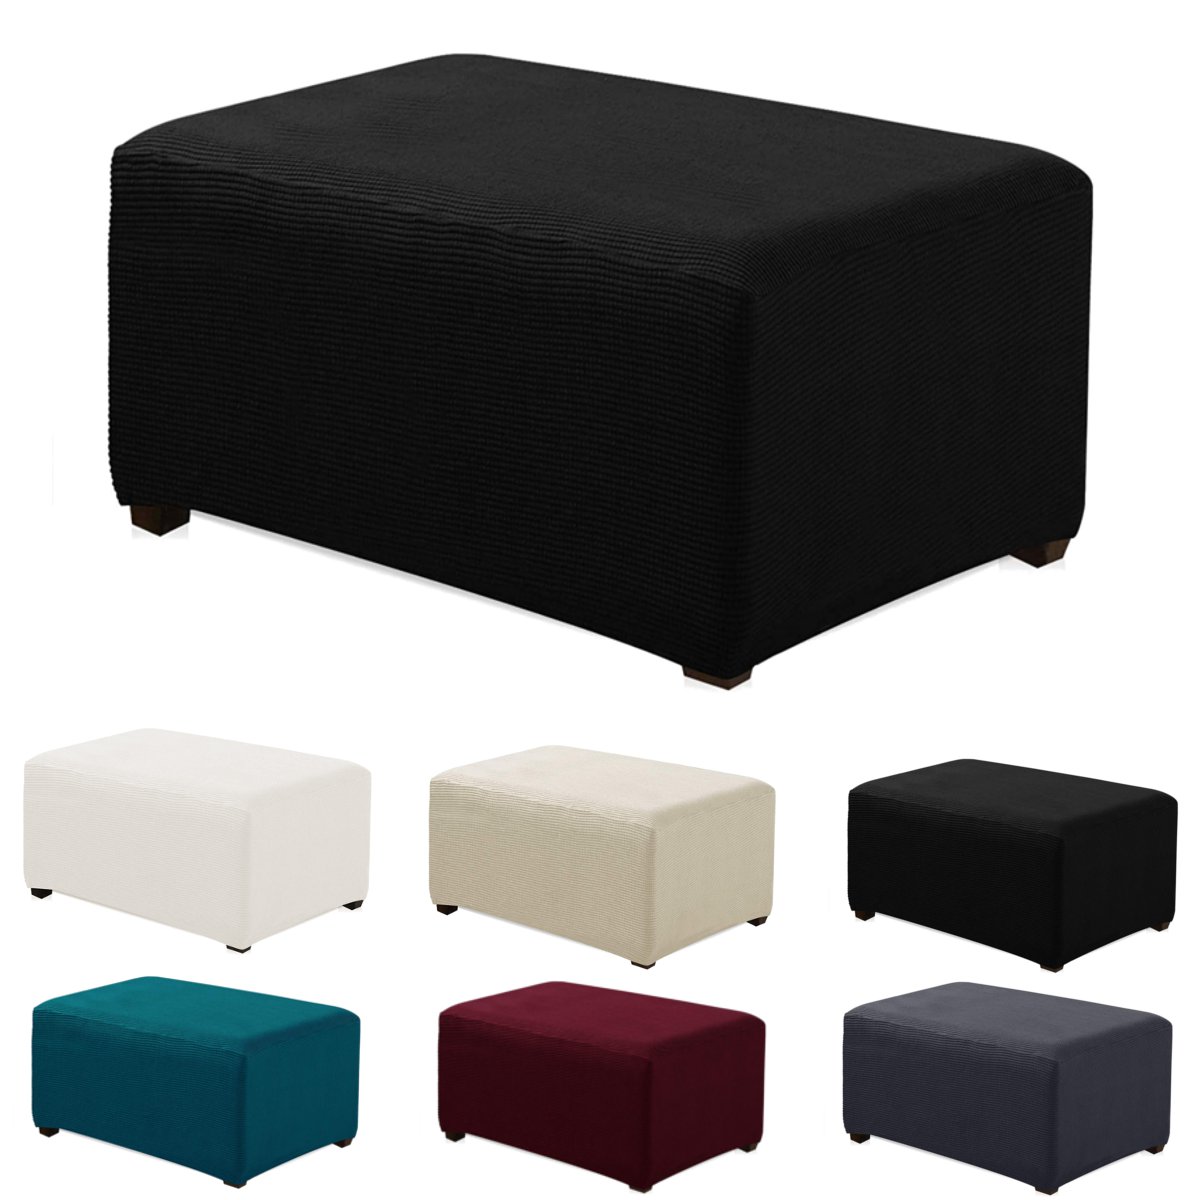 Stretchy Fabric Footstool Cover Square Ottoman Protector Stretch Slipcover for Home Sofa 9